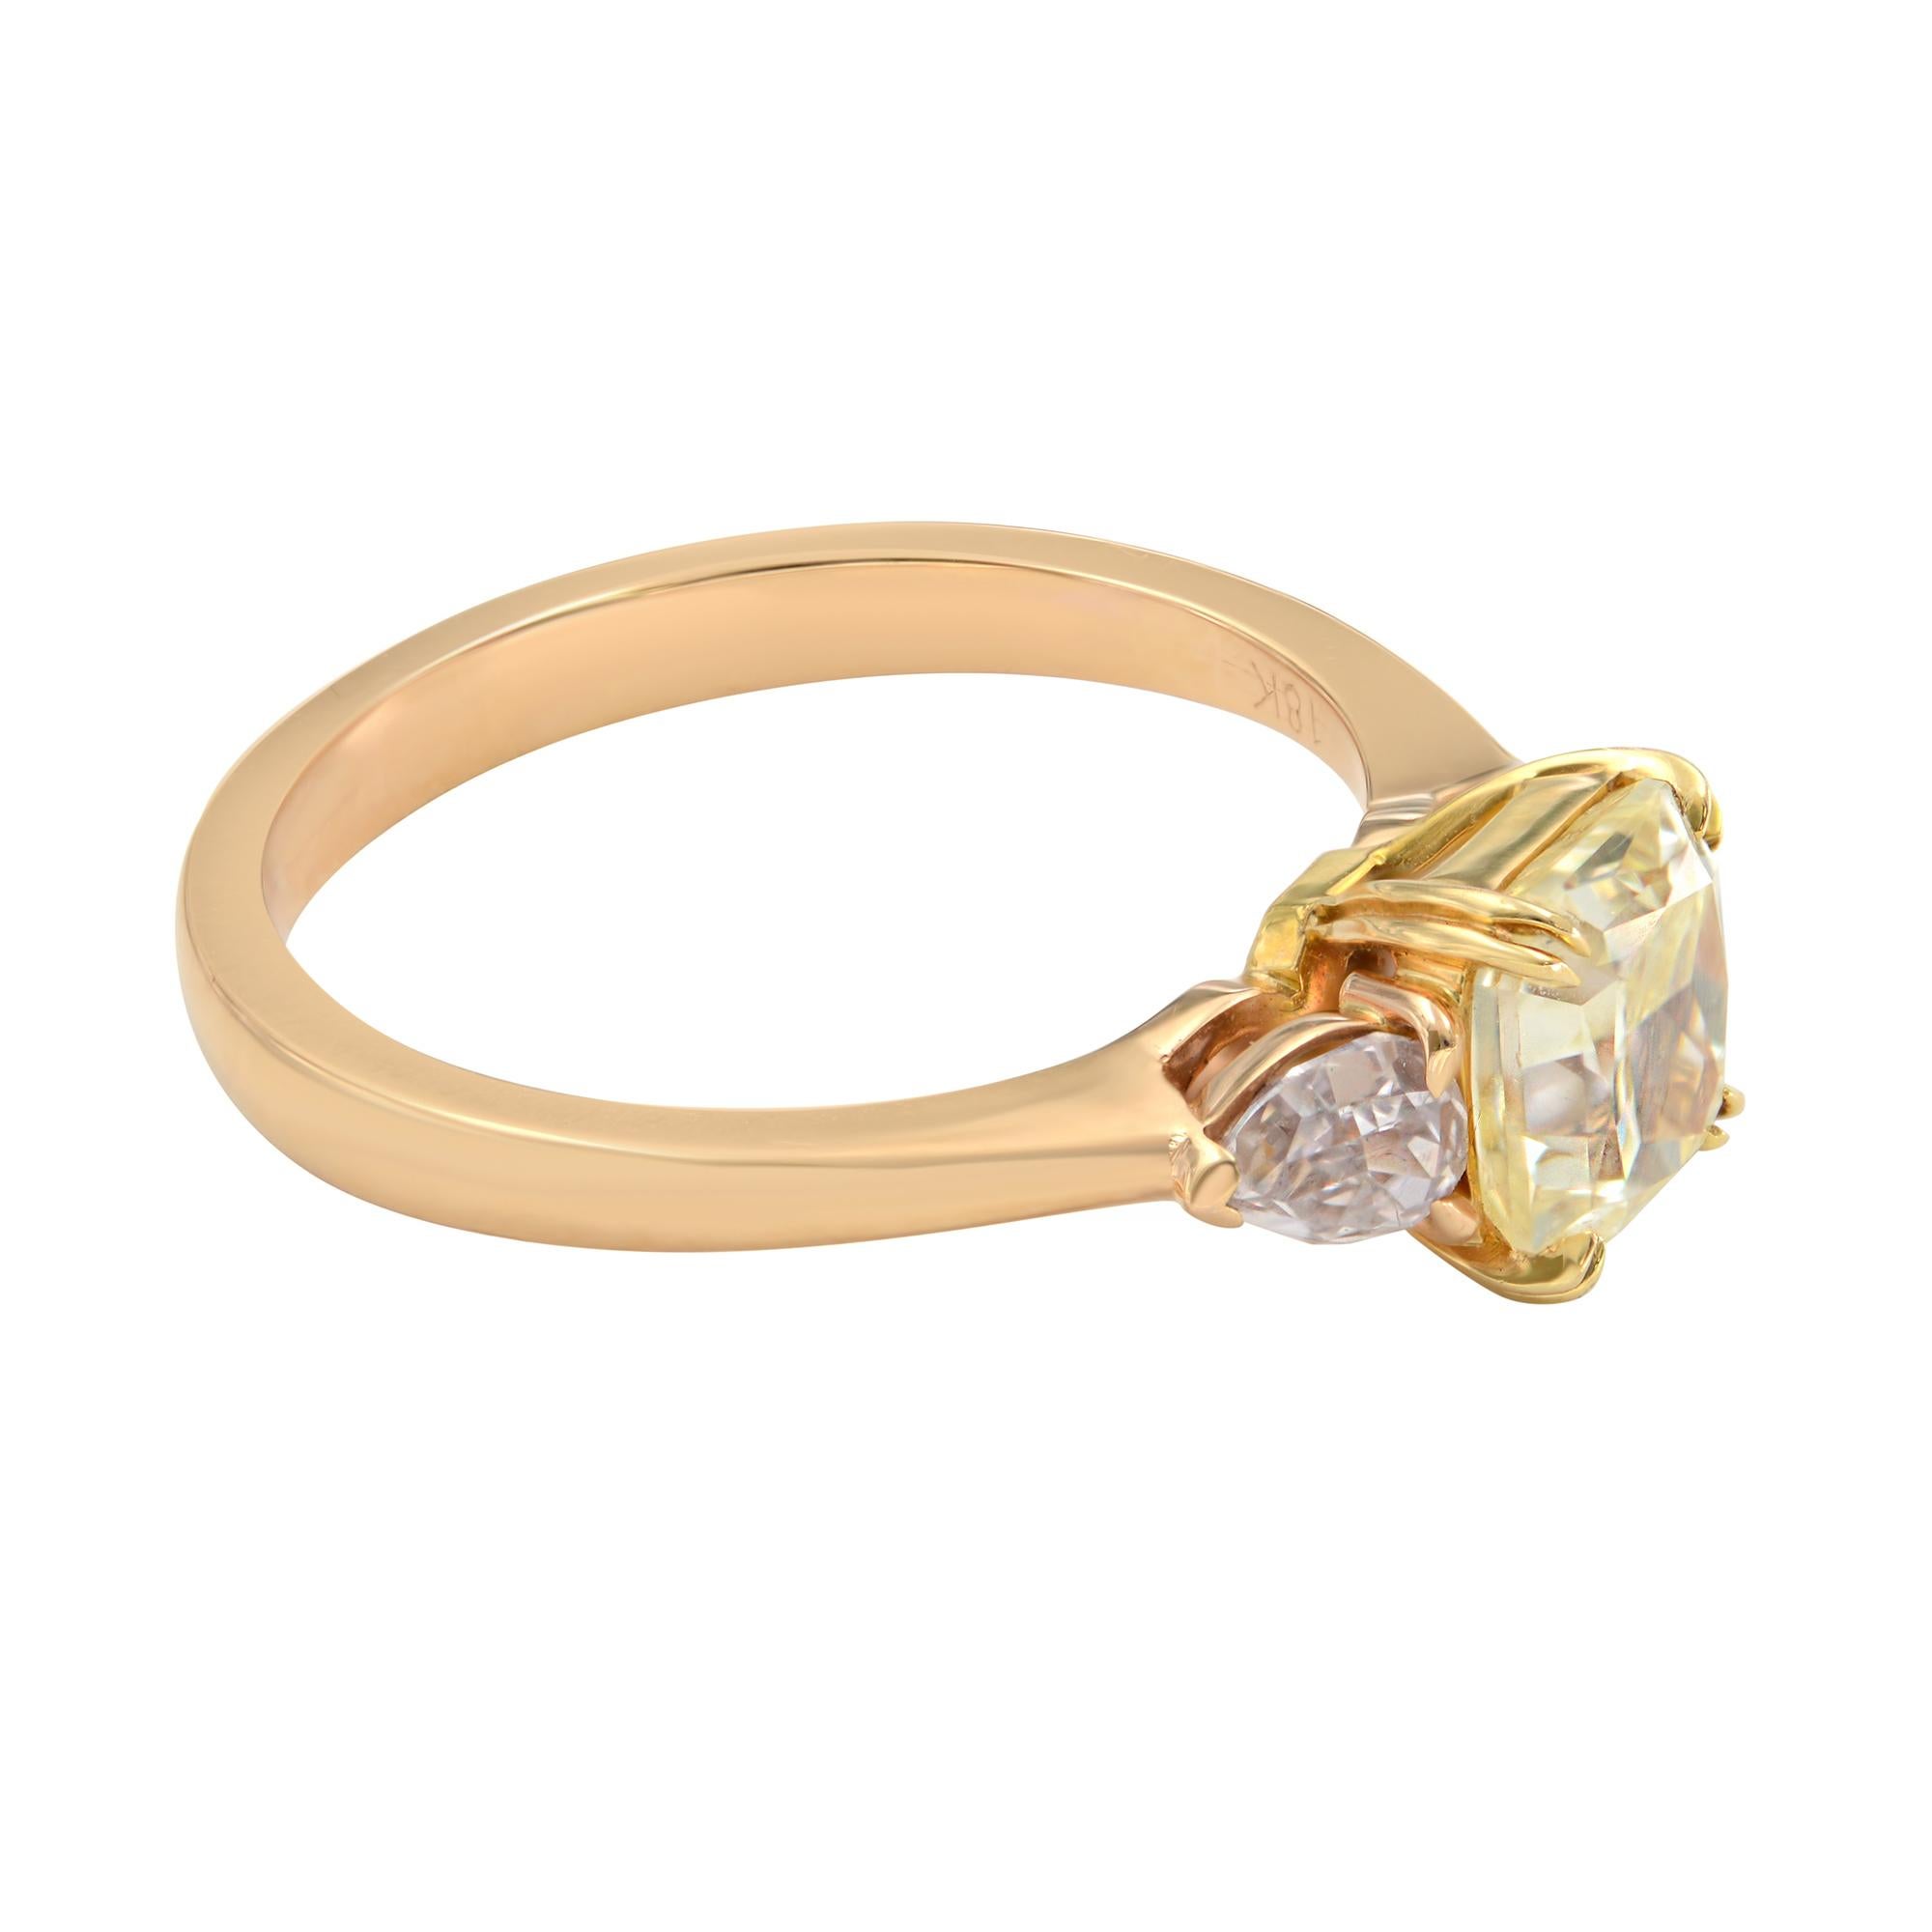 A beautiful, unique fancy yellow and pink diamond three-stone engagement ring. Crafted in 18K yellow gold. Fancy yellow weight, 1.37cts. Pink diamond weight, 0.36cts. Ring size 6.5. The ring comes with 3 GIA certificates. 
